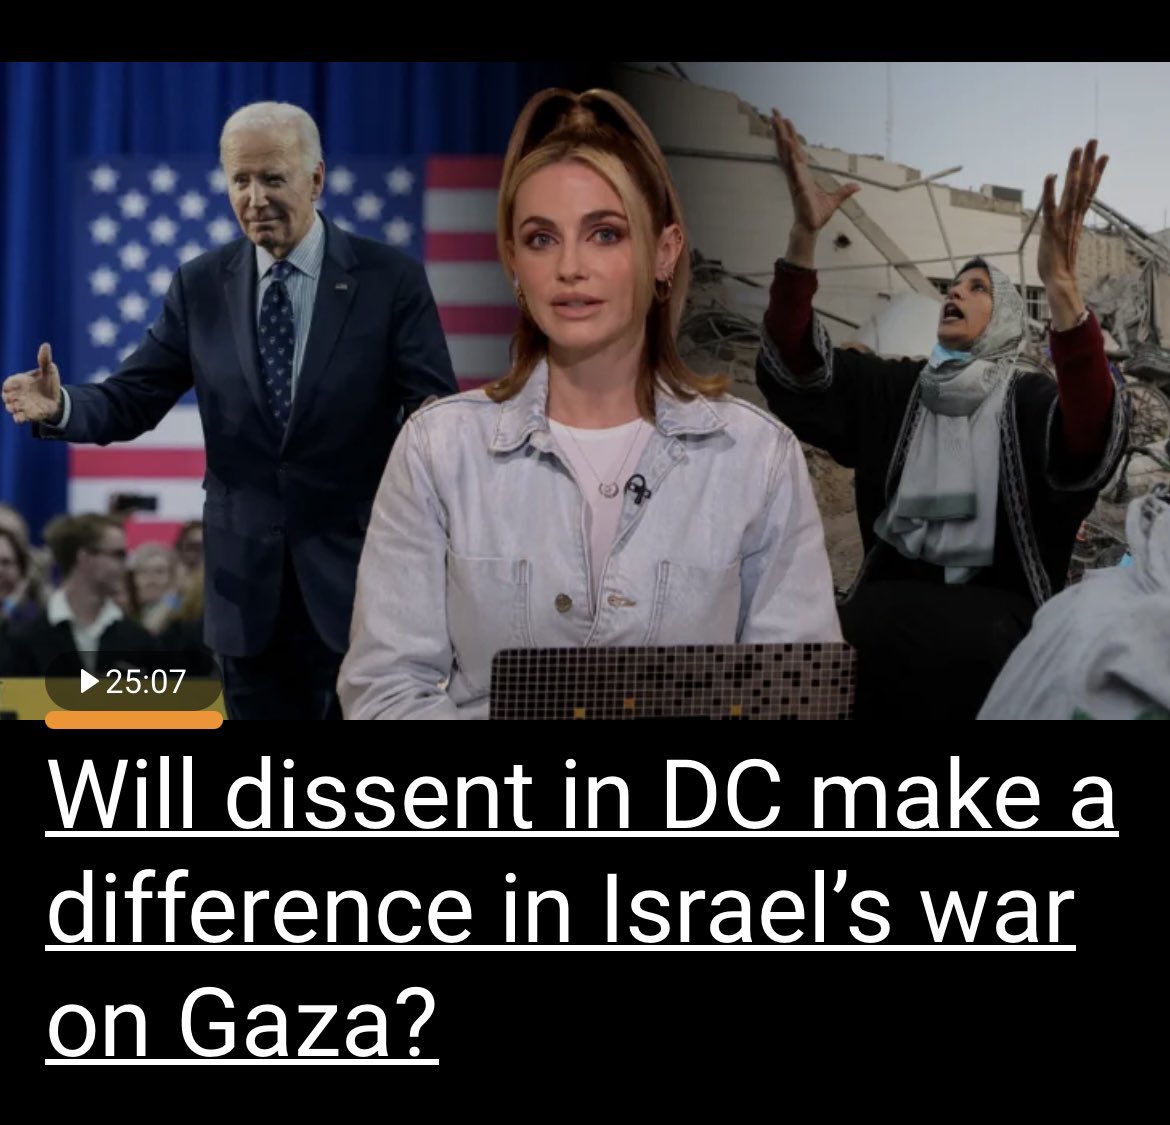 Highly recommend watching the latest @AJStream episode “Will dissent in DC make a difference in Israel’s war on Gaza?” With Anelle Sheline, @gregjstoker @jasmineelgamal and an exclusive with Feds United4Peace aljazeera.com/program/the-st…